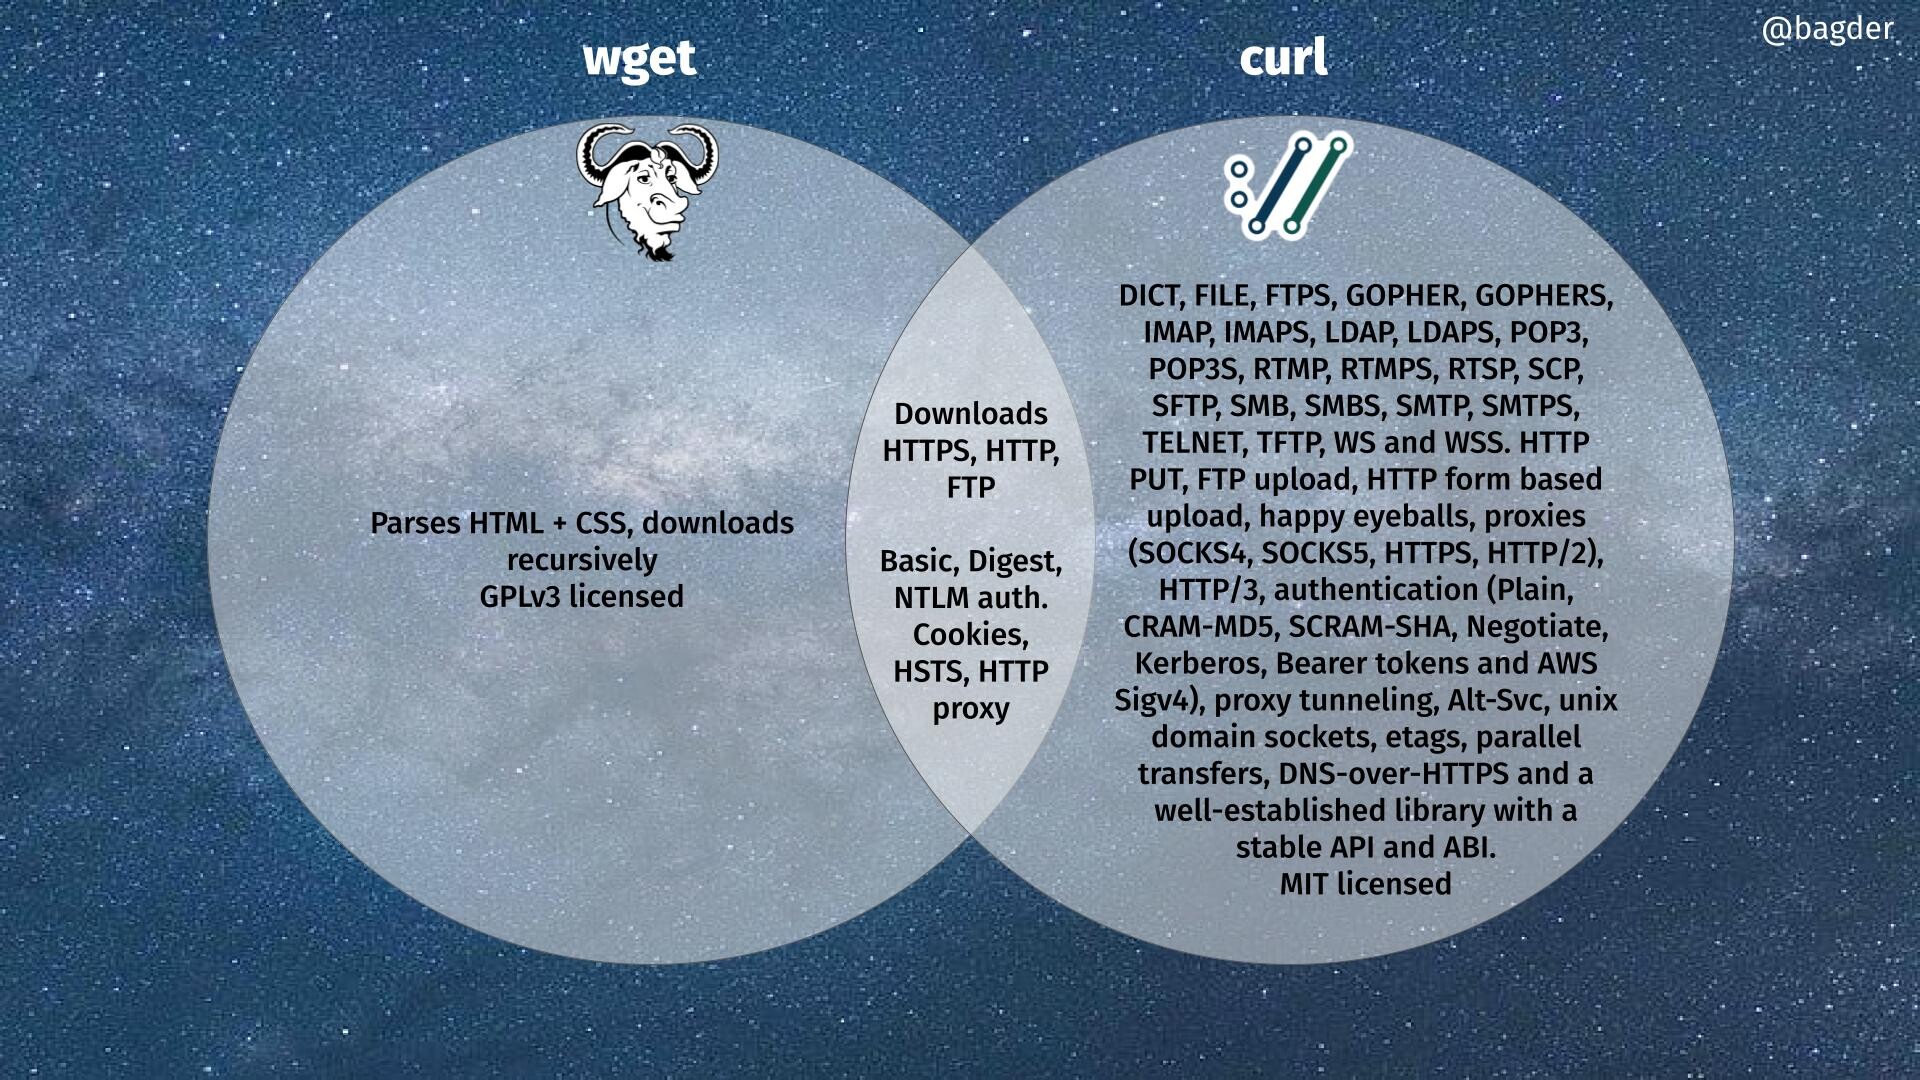 a Venn diagram showing a rather small overlap between curl and wget features